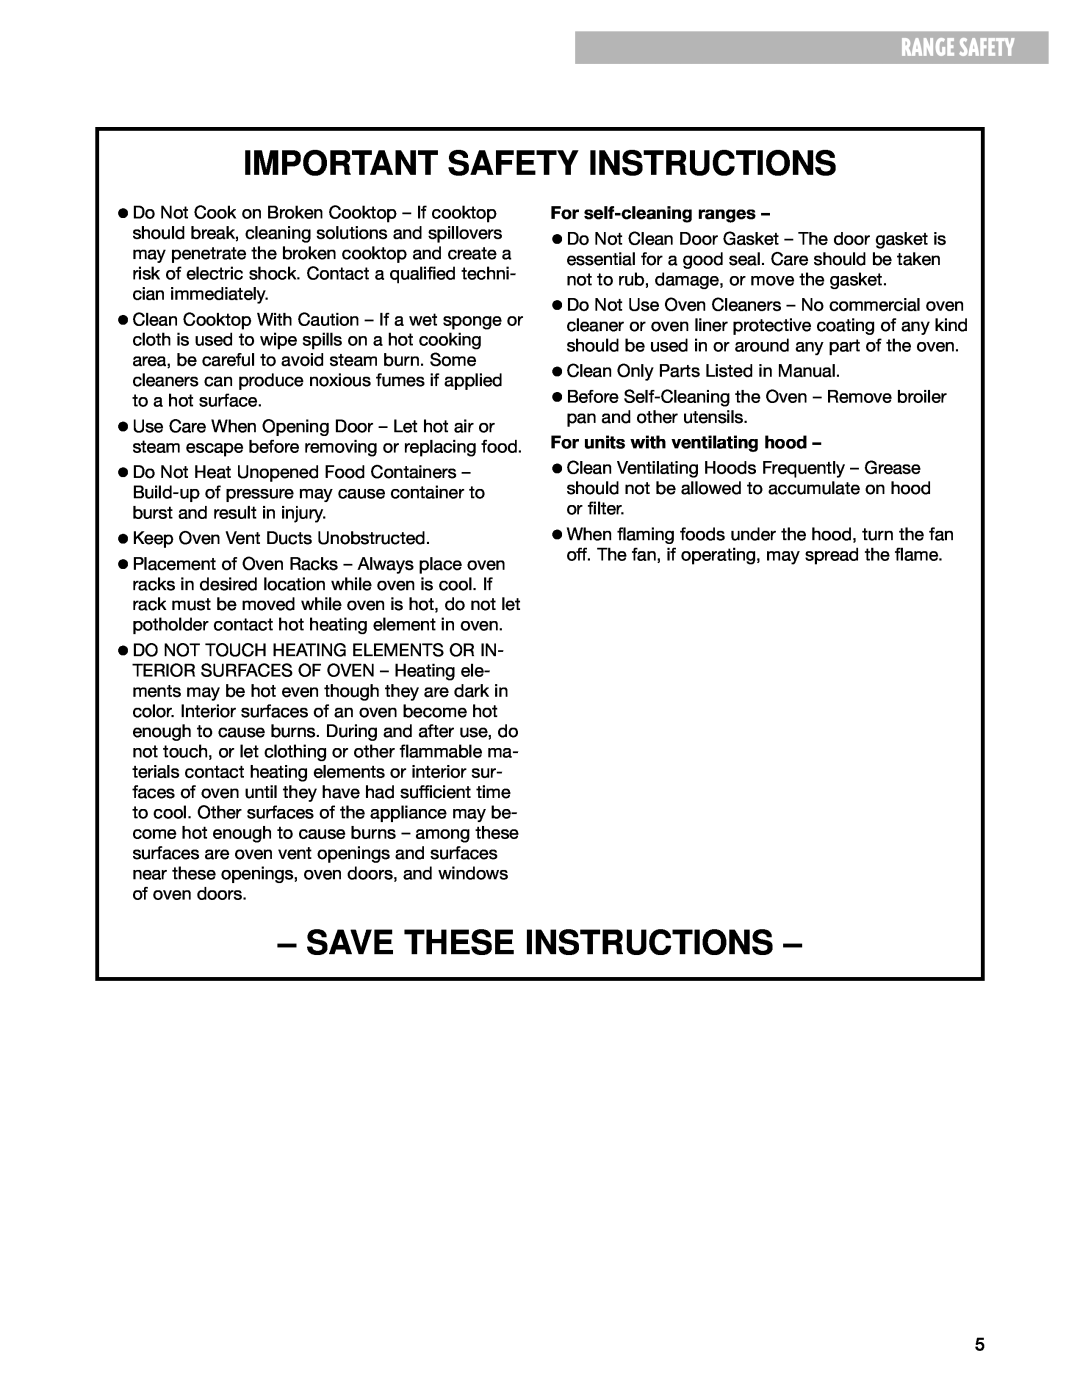 Whirlpool GR399LXG warranty Important Safety Instructions, Save These Instructions, Range Safety, For self-cleaning ranges 